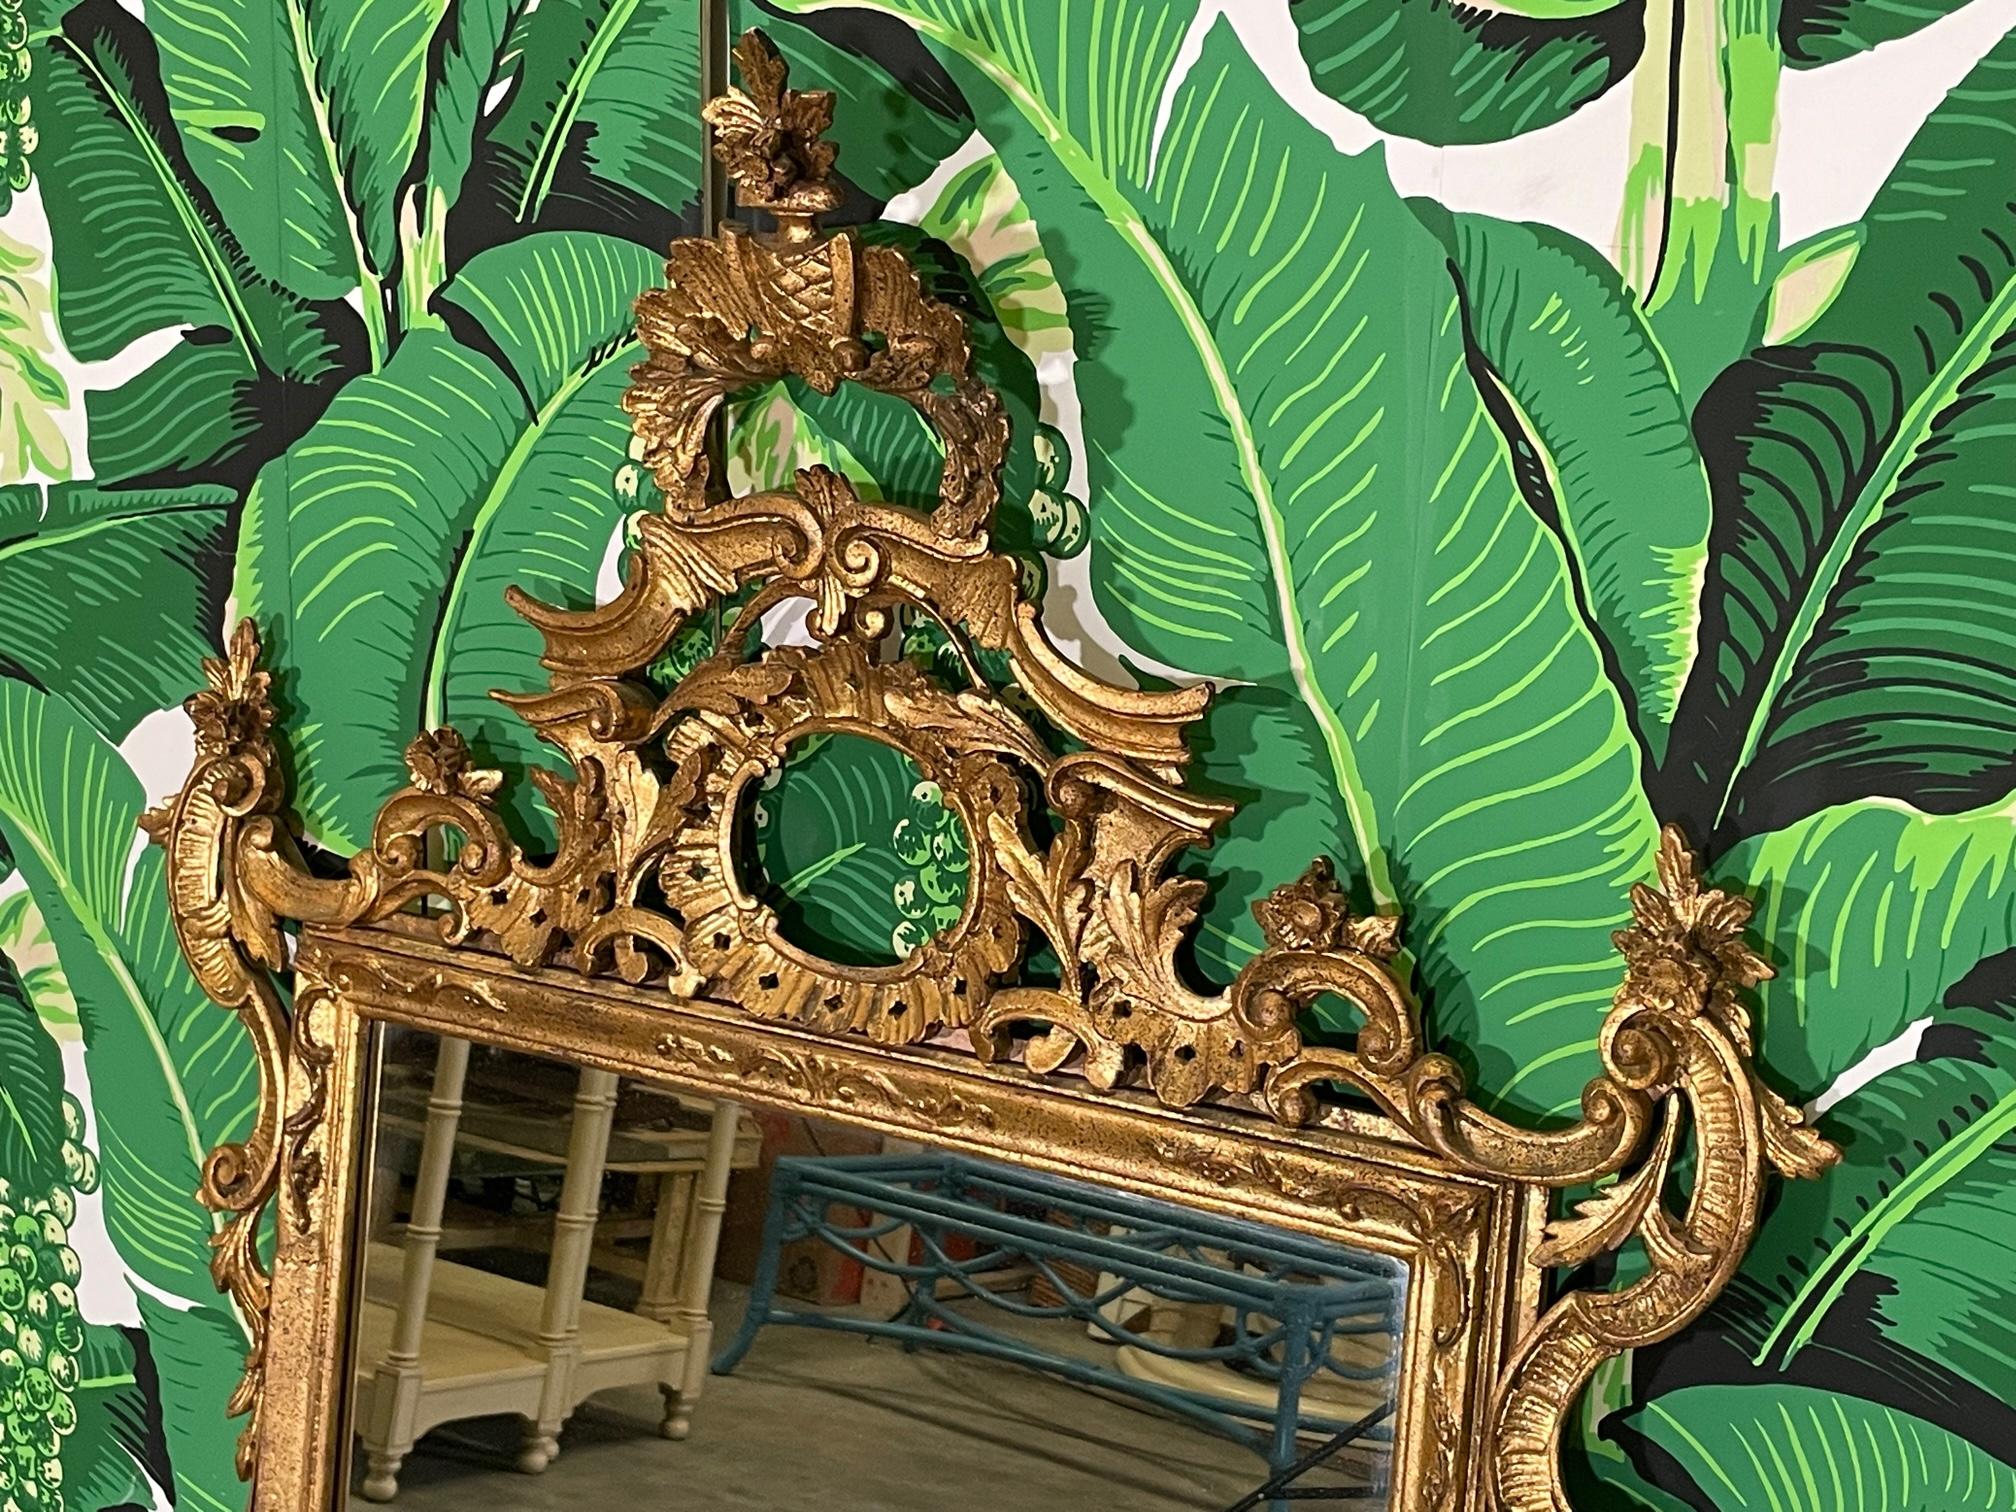 Large Rococo style wall mirror features original gold gilding and an open carved frame with flowers and scrolling acanthus leaves. Marked with Italy tag. Good condition with imperfections consistent with age, see photos for condition details.For a